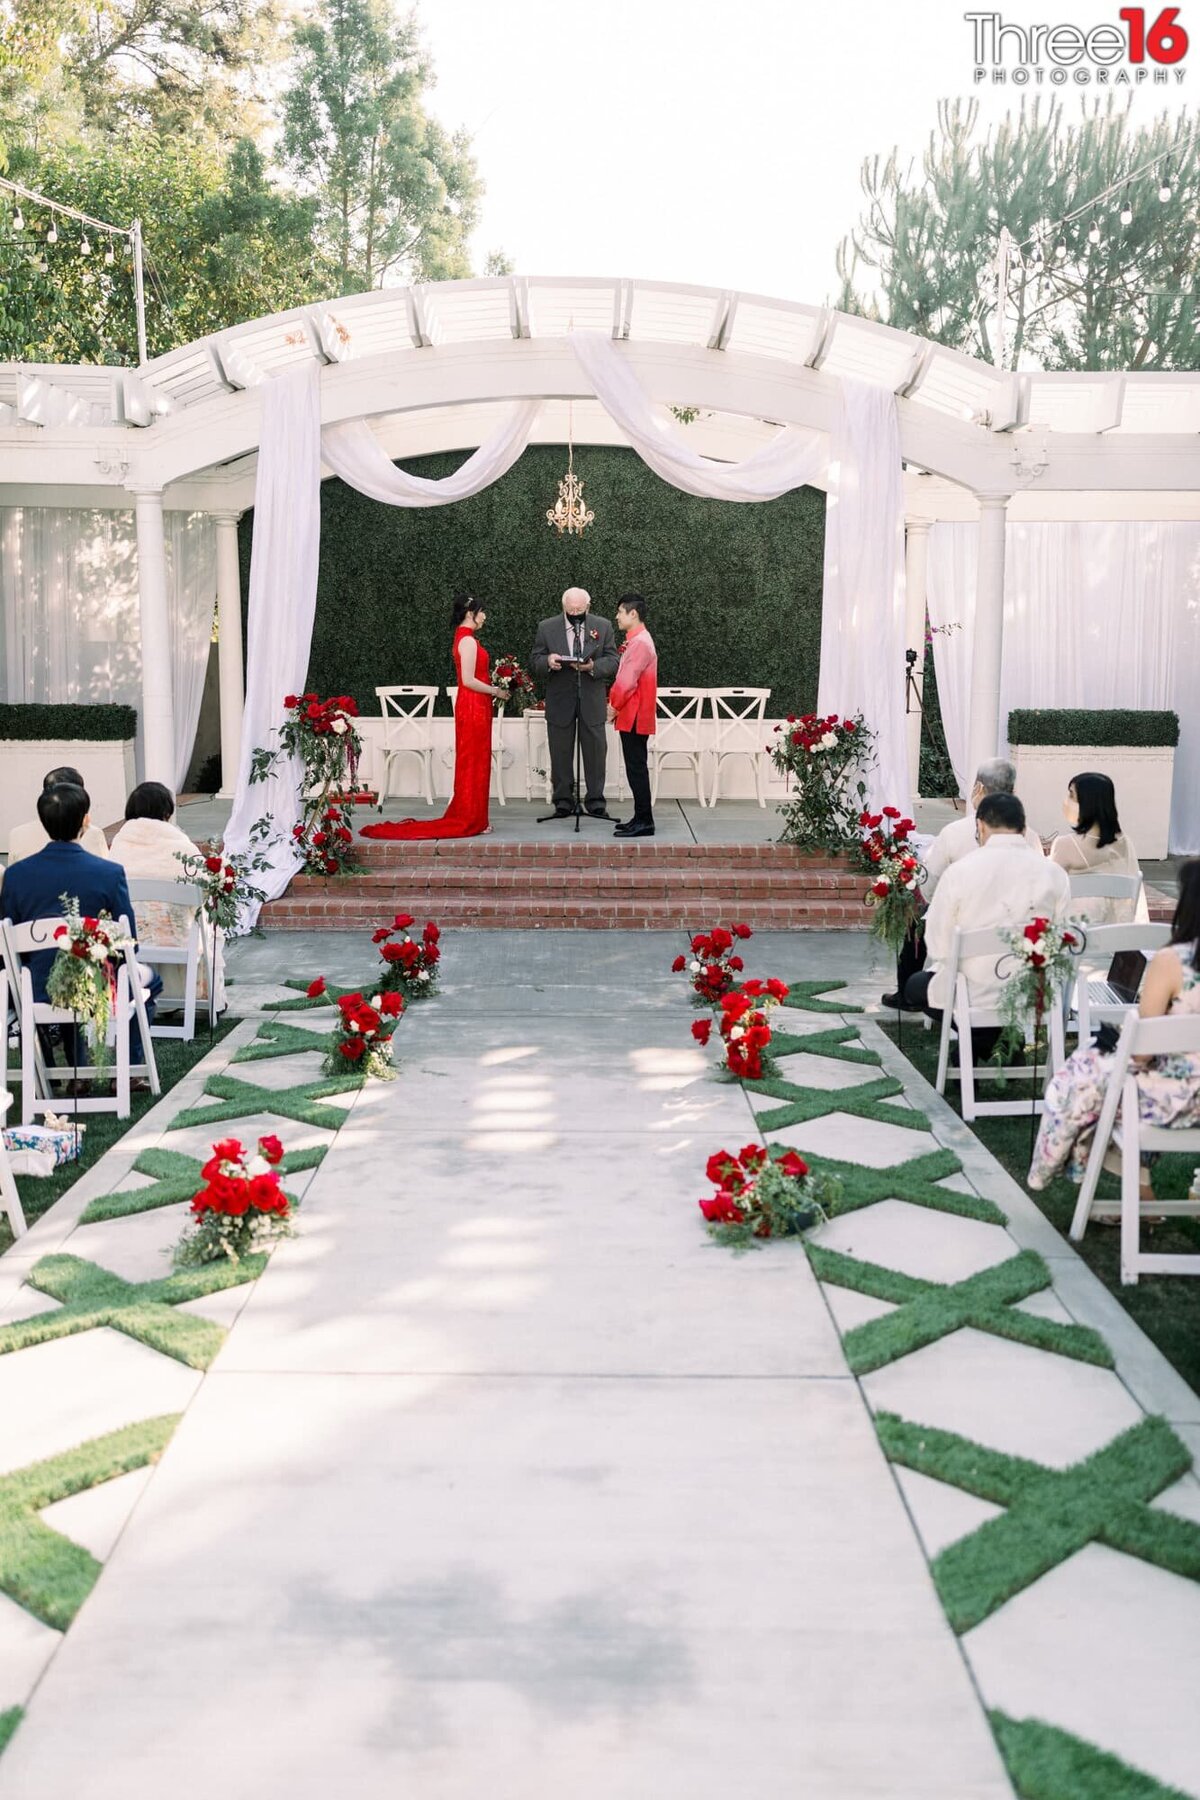 Wedding ceremony at the Noriega House in Bakersfield